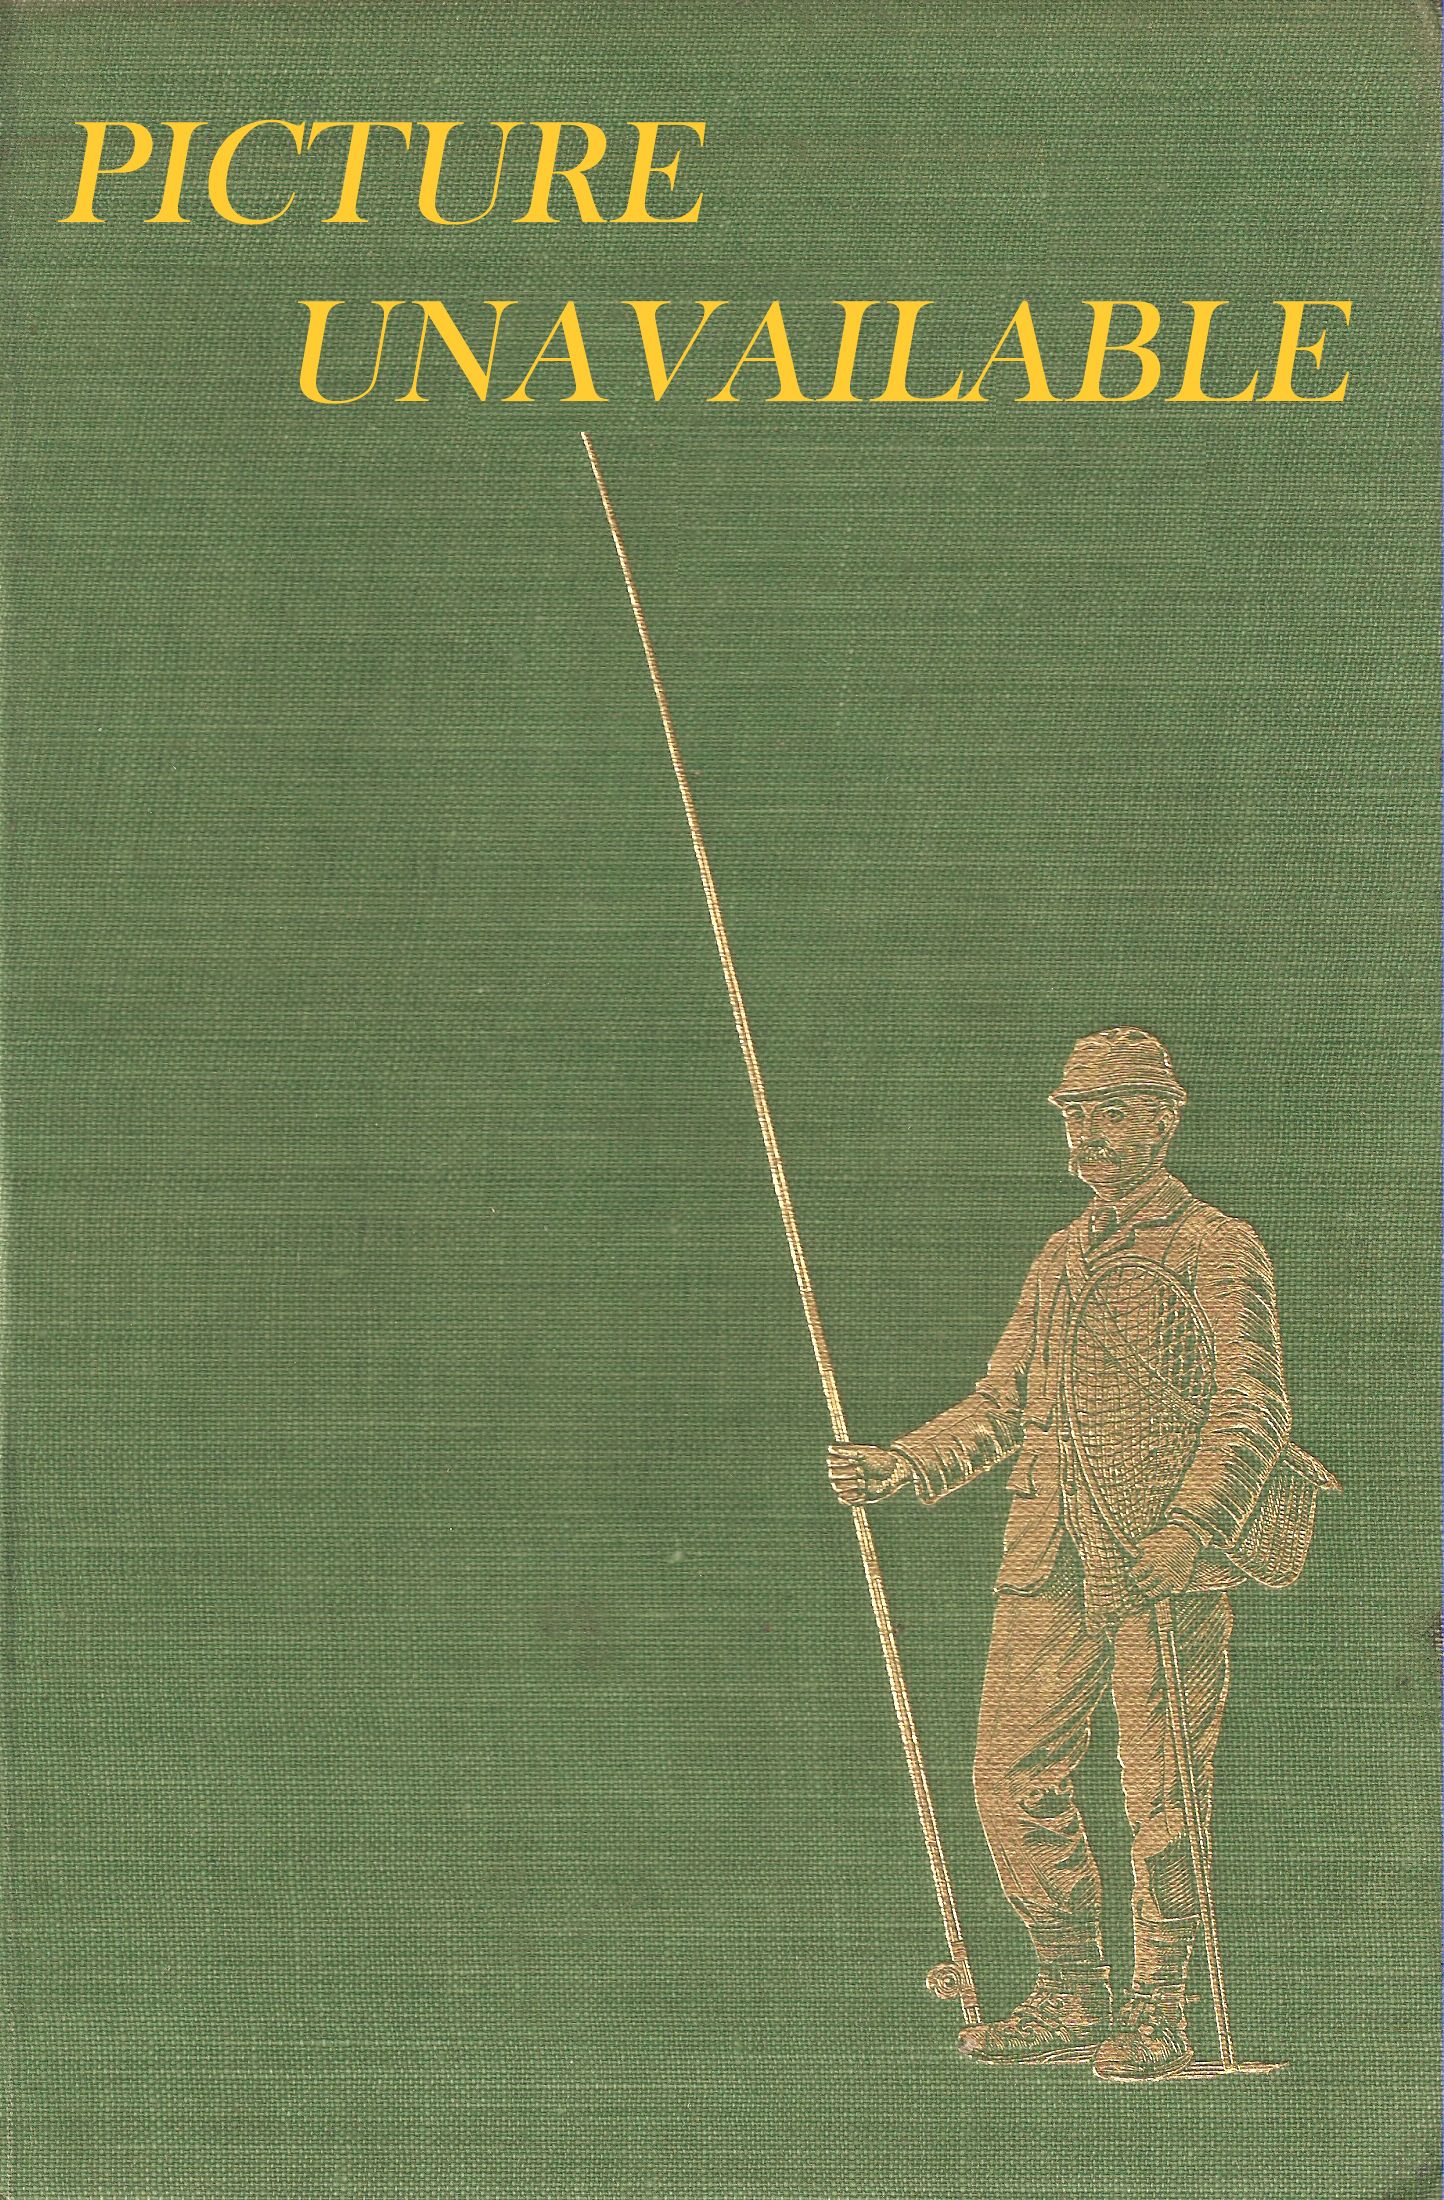 A NEW CHRONICLE OF THE COMPLEAT ANGLER. By Peter Oliver.